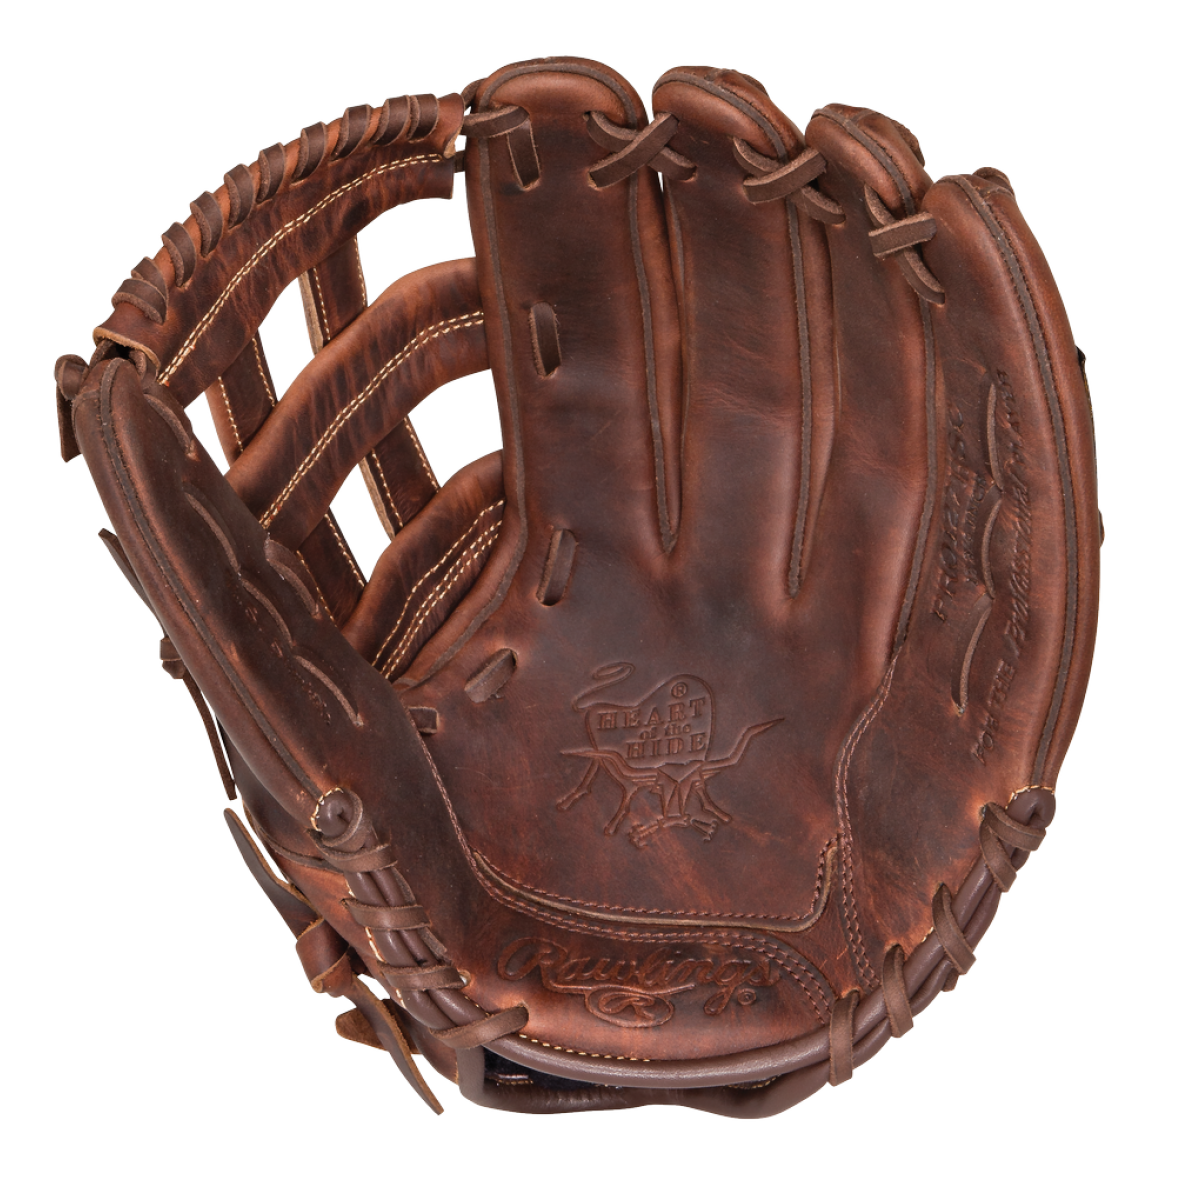 free-baseball-glove-download-free-baseball-glove-png-images-free-cliparts-on-clipart-library